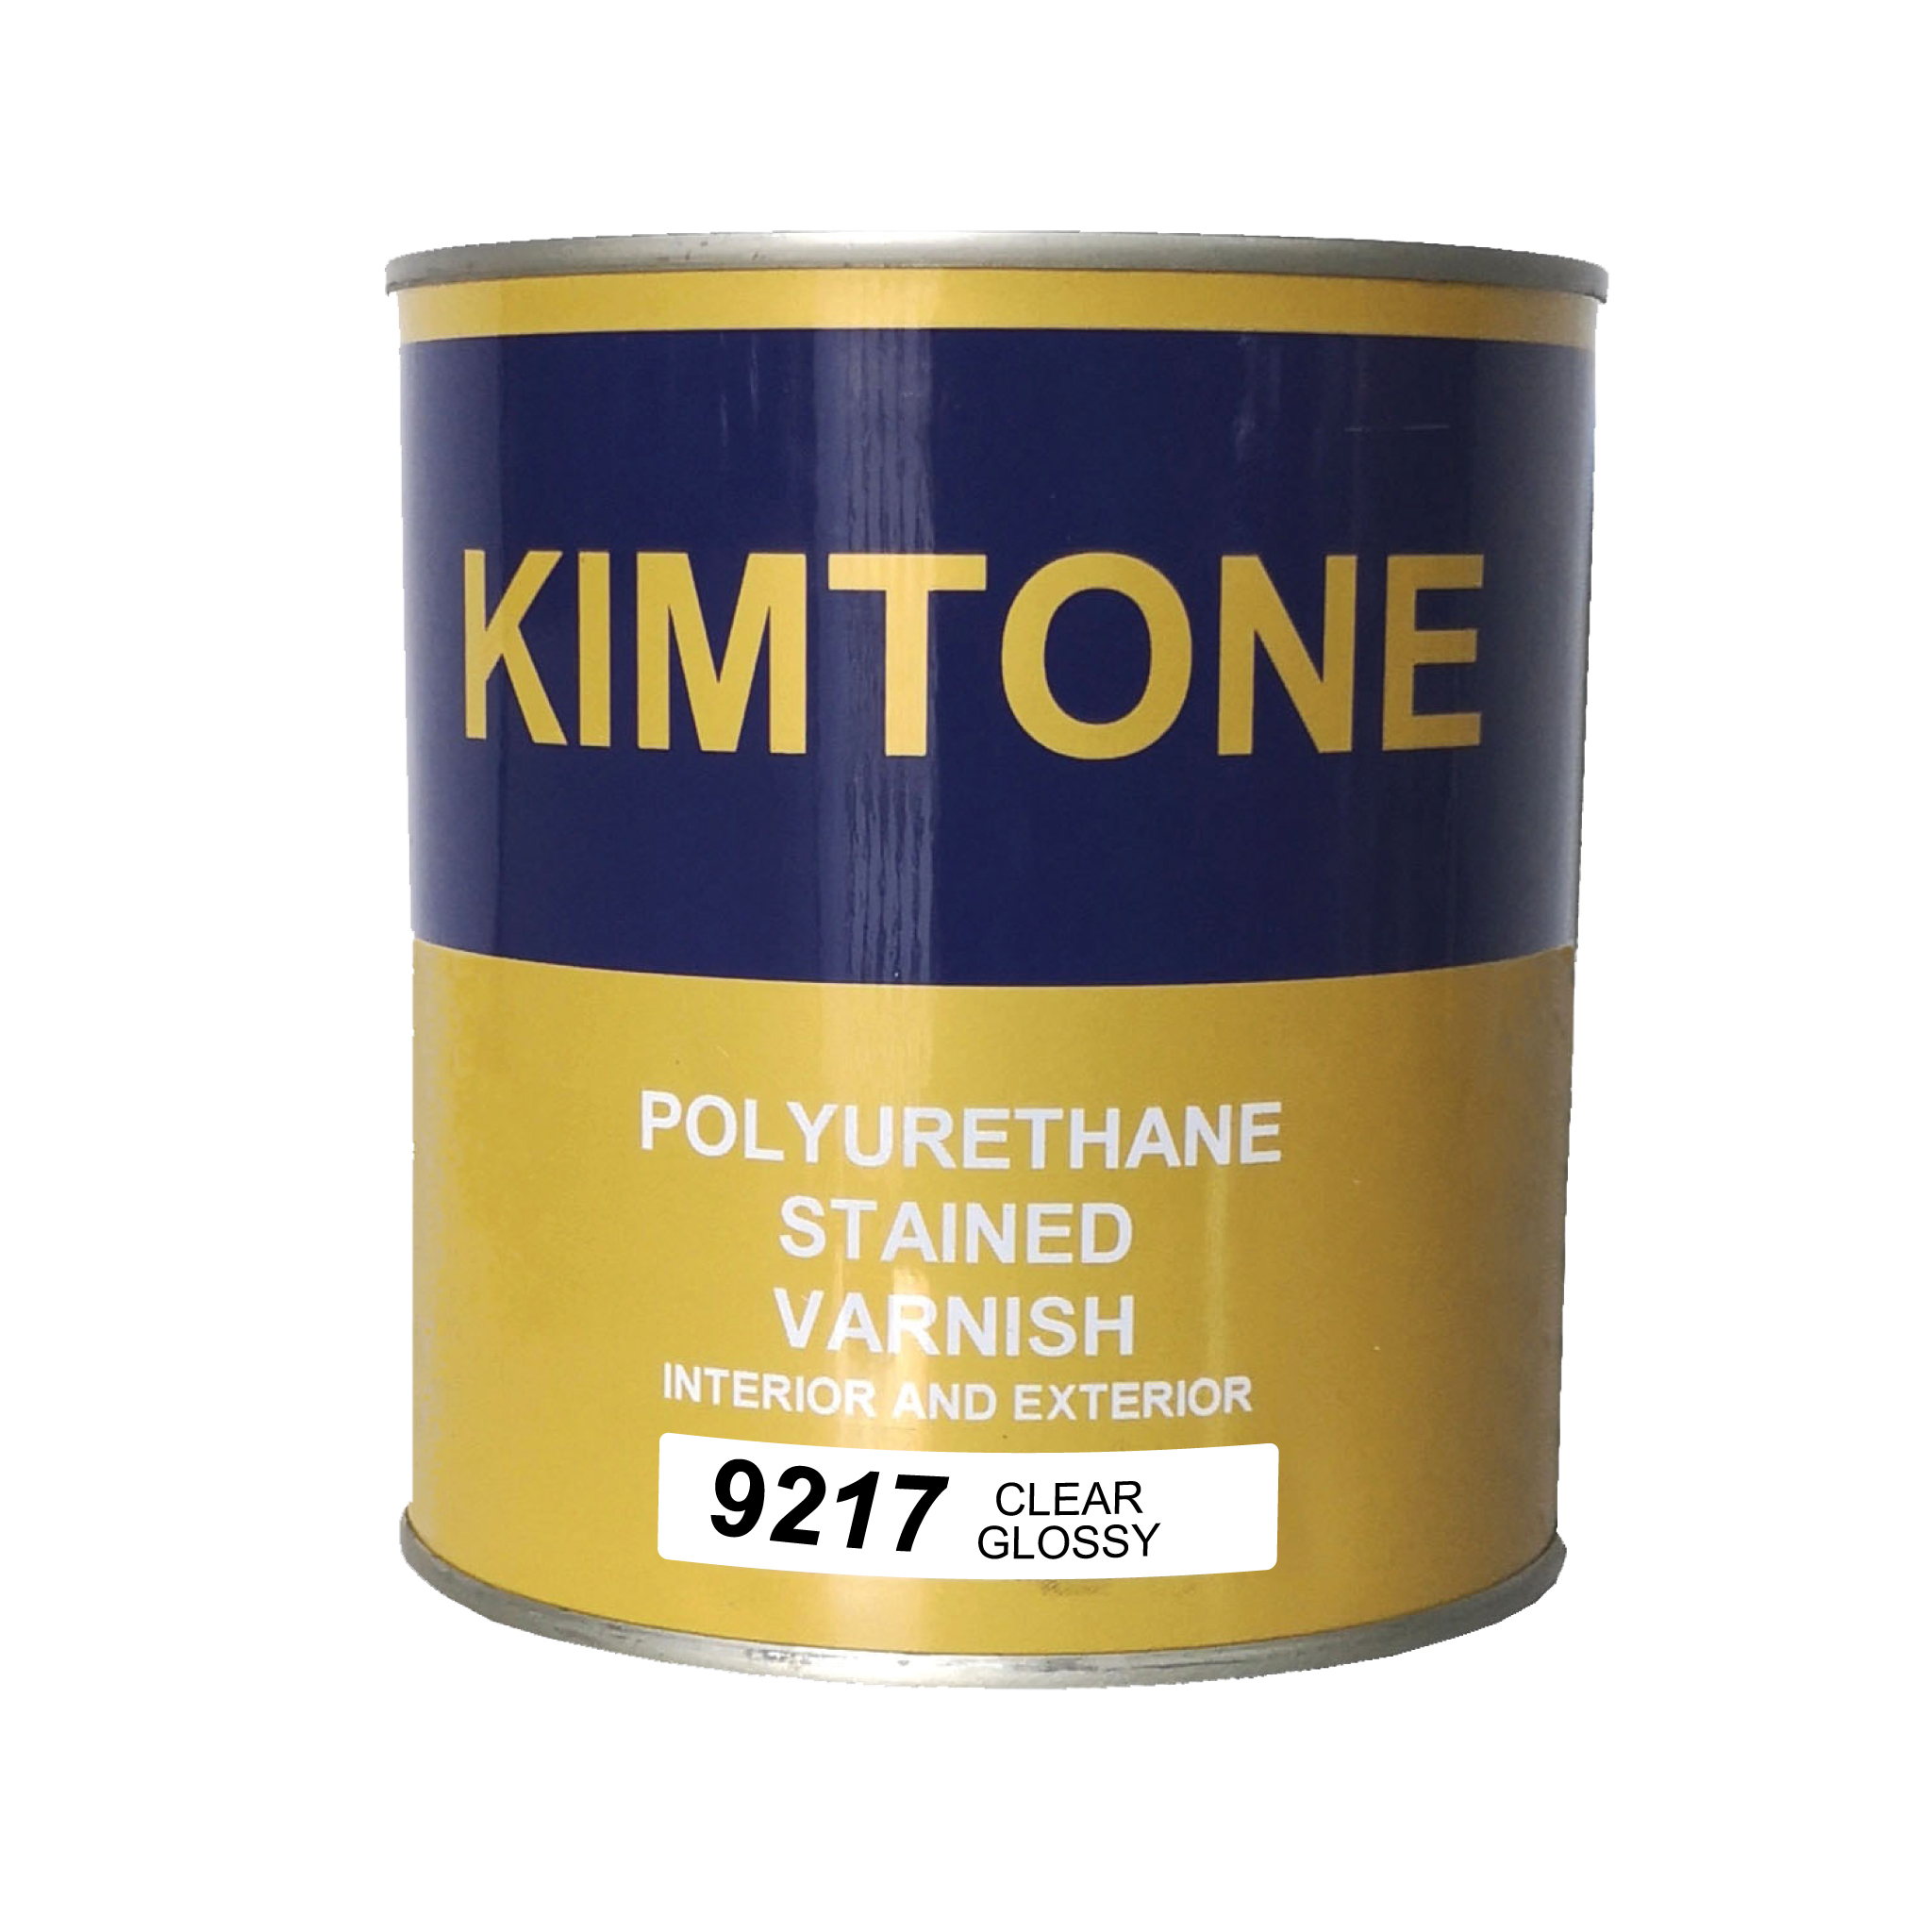 Gold Paint for Wood, All Surfaces, Metal Statue Coloring, Oily, Water